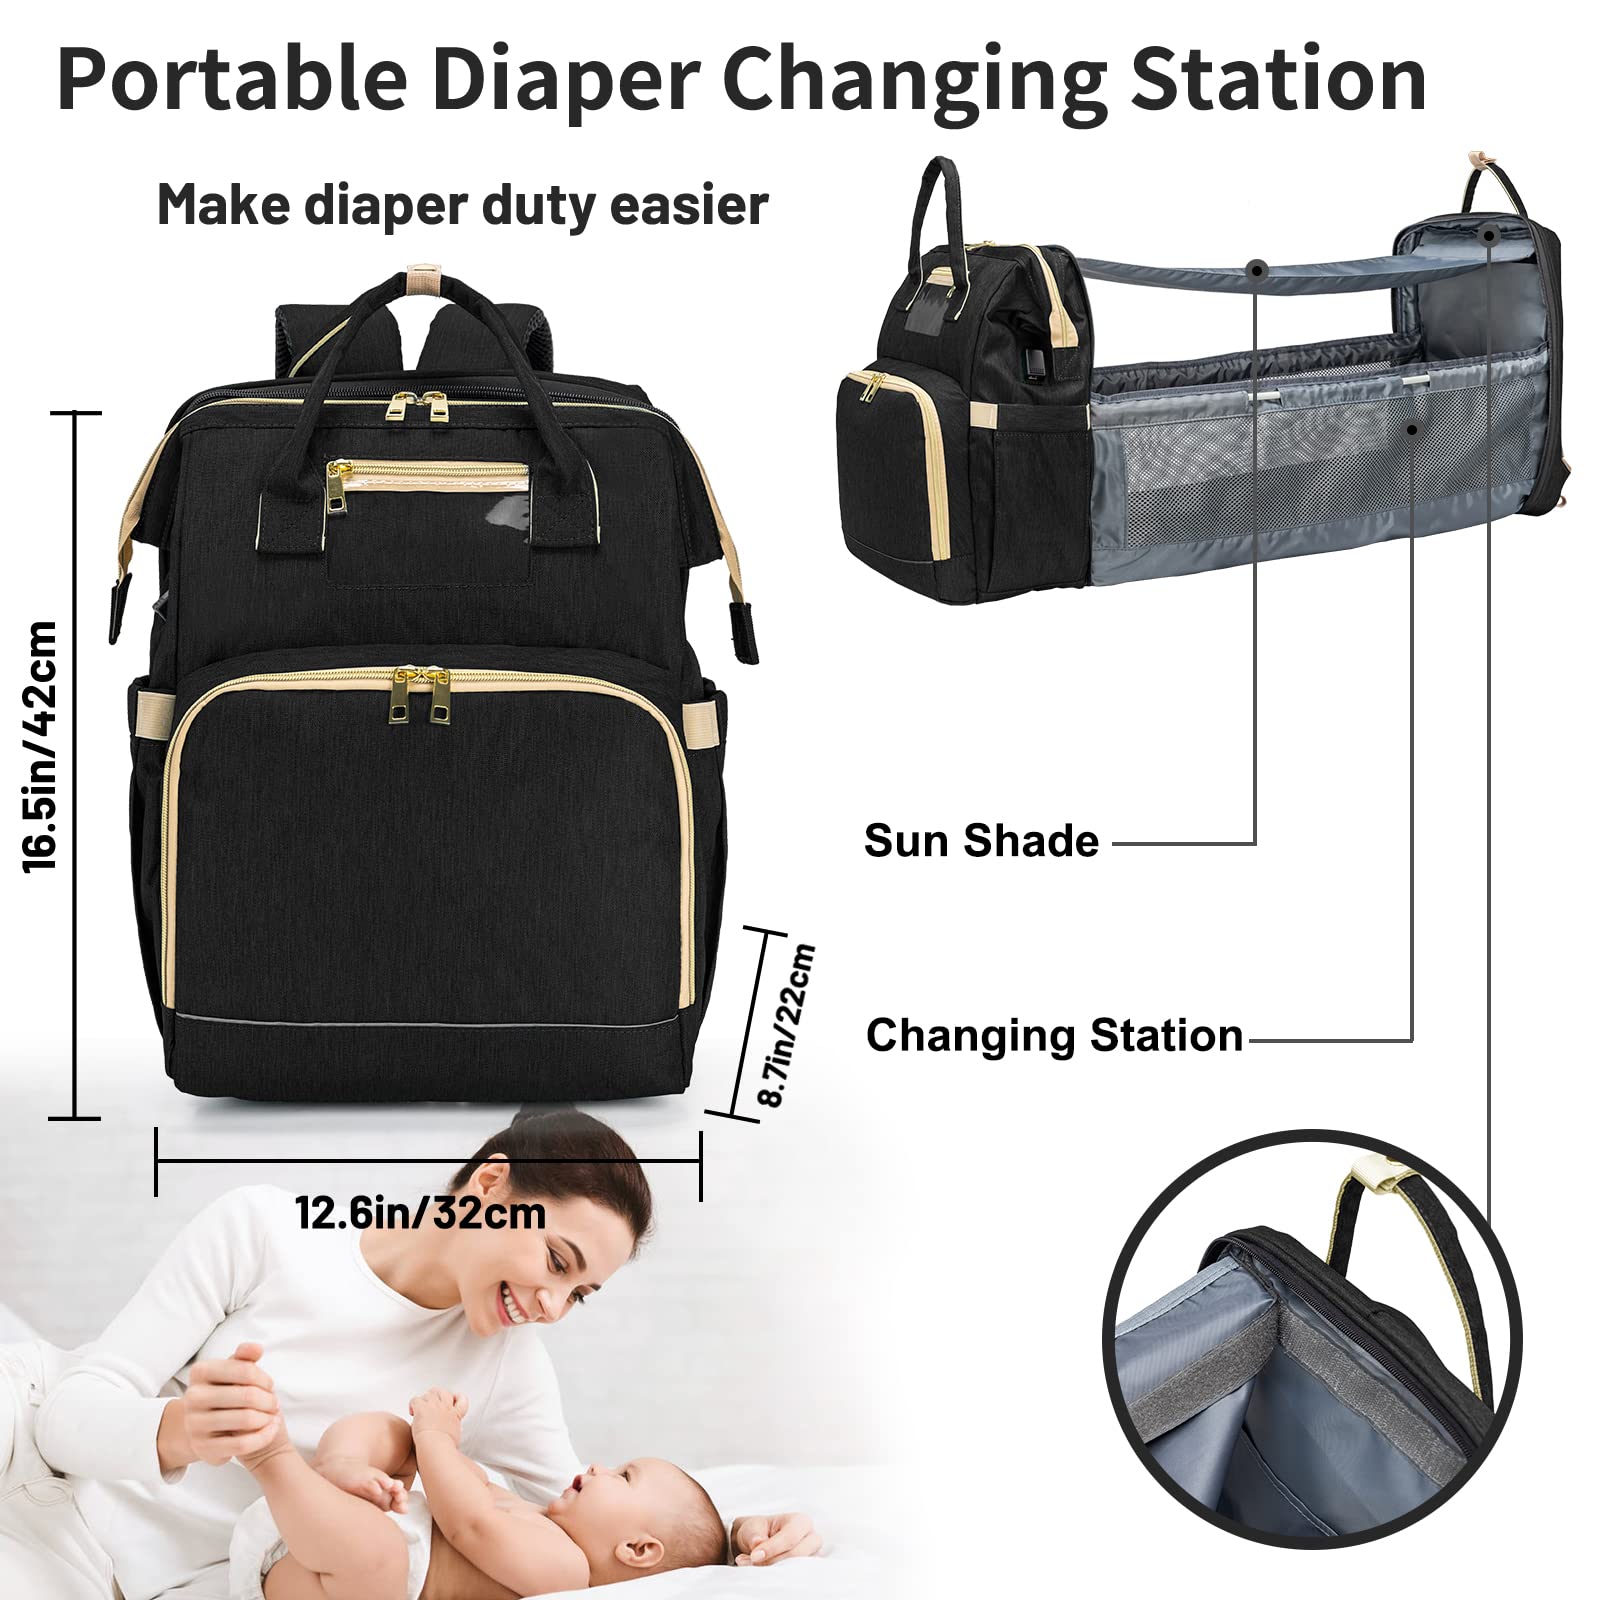 KABAQOO Diaper Bag Backpack, Large Baby Diaper Bags for Boys Girls, Baby Bag with USB Charging Port, Multifunction Waterproof Travel Back Pack for Moms Dads, Black